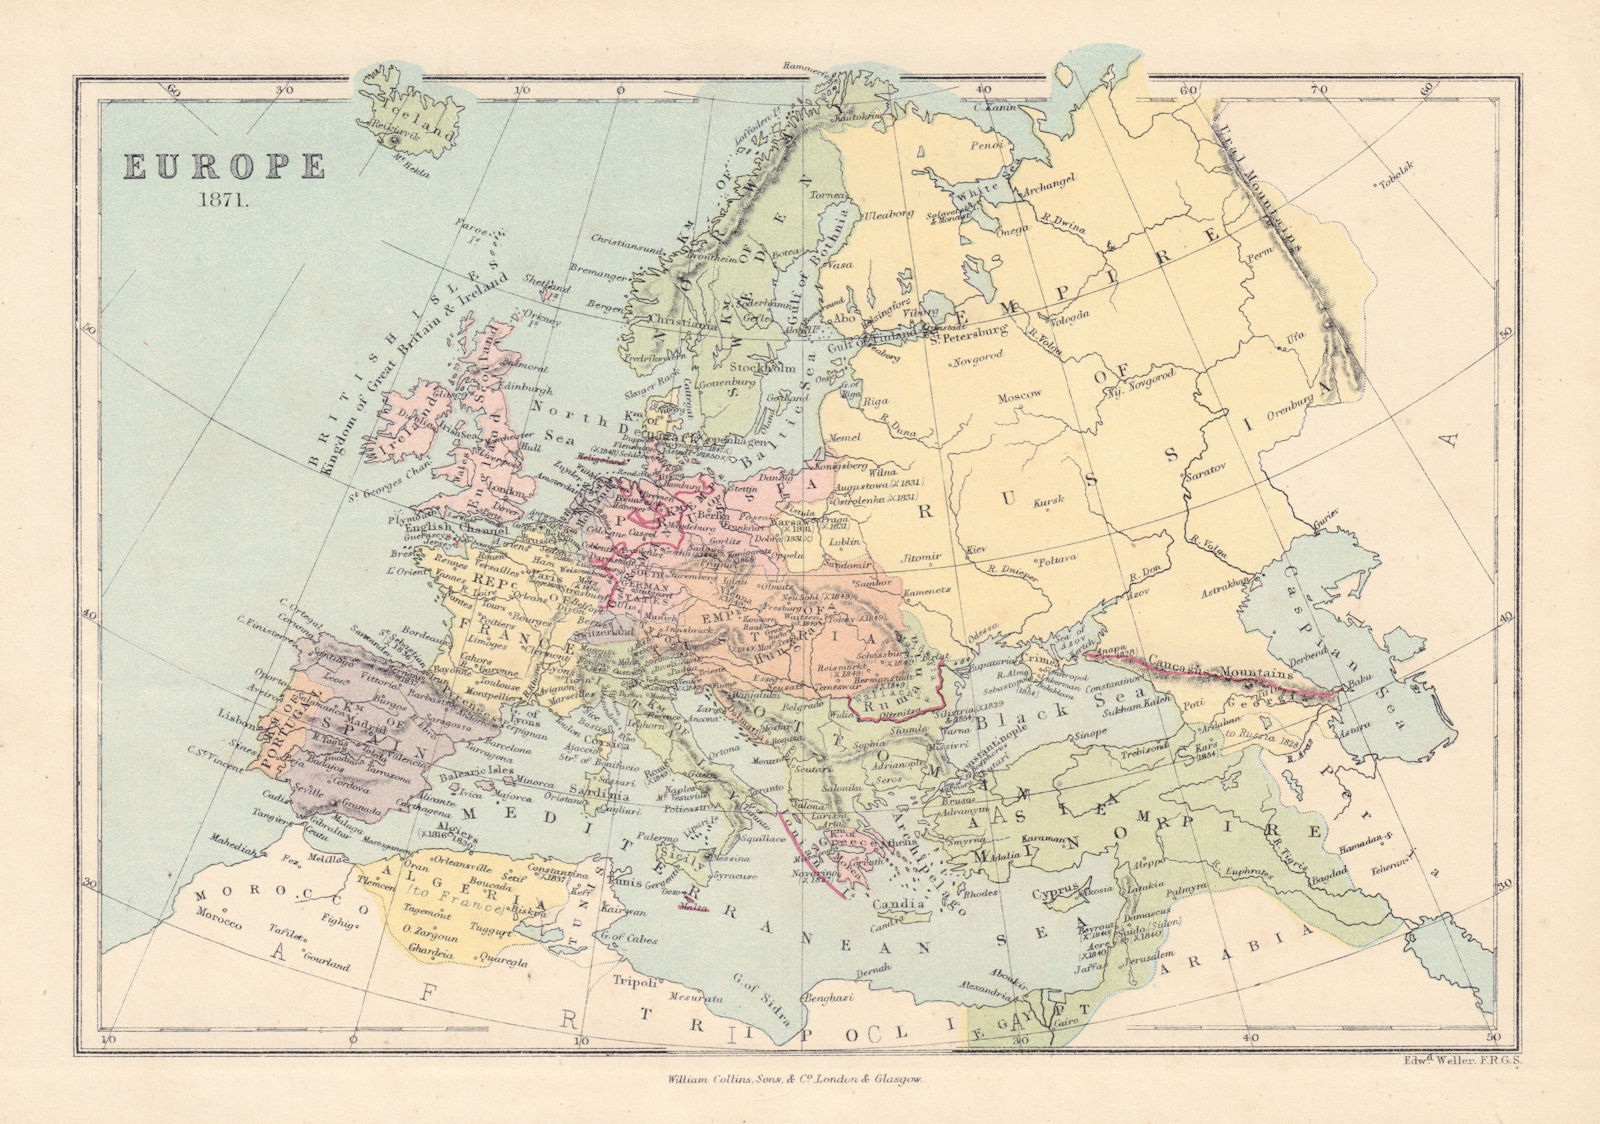 EUROPE in 1871 showing selected key 19C battles & dates. COLLINS 1873 old map